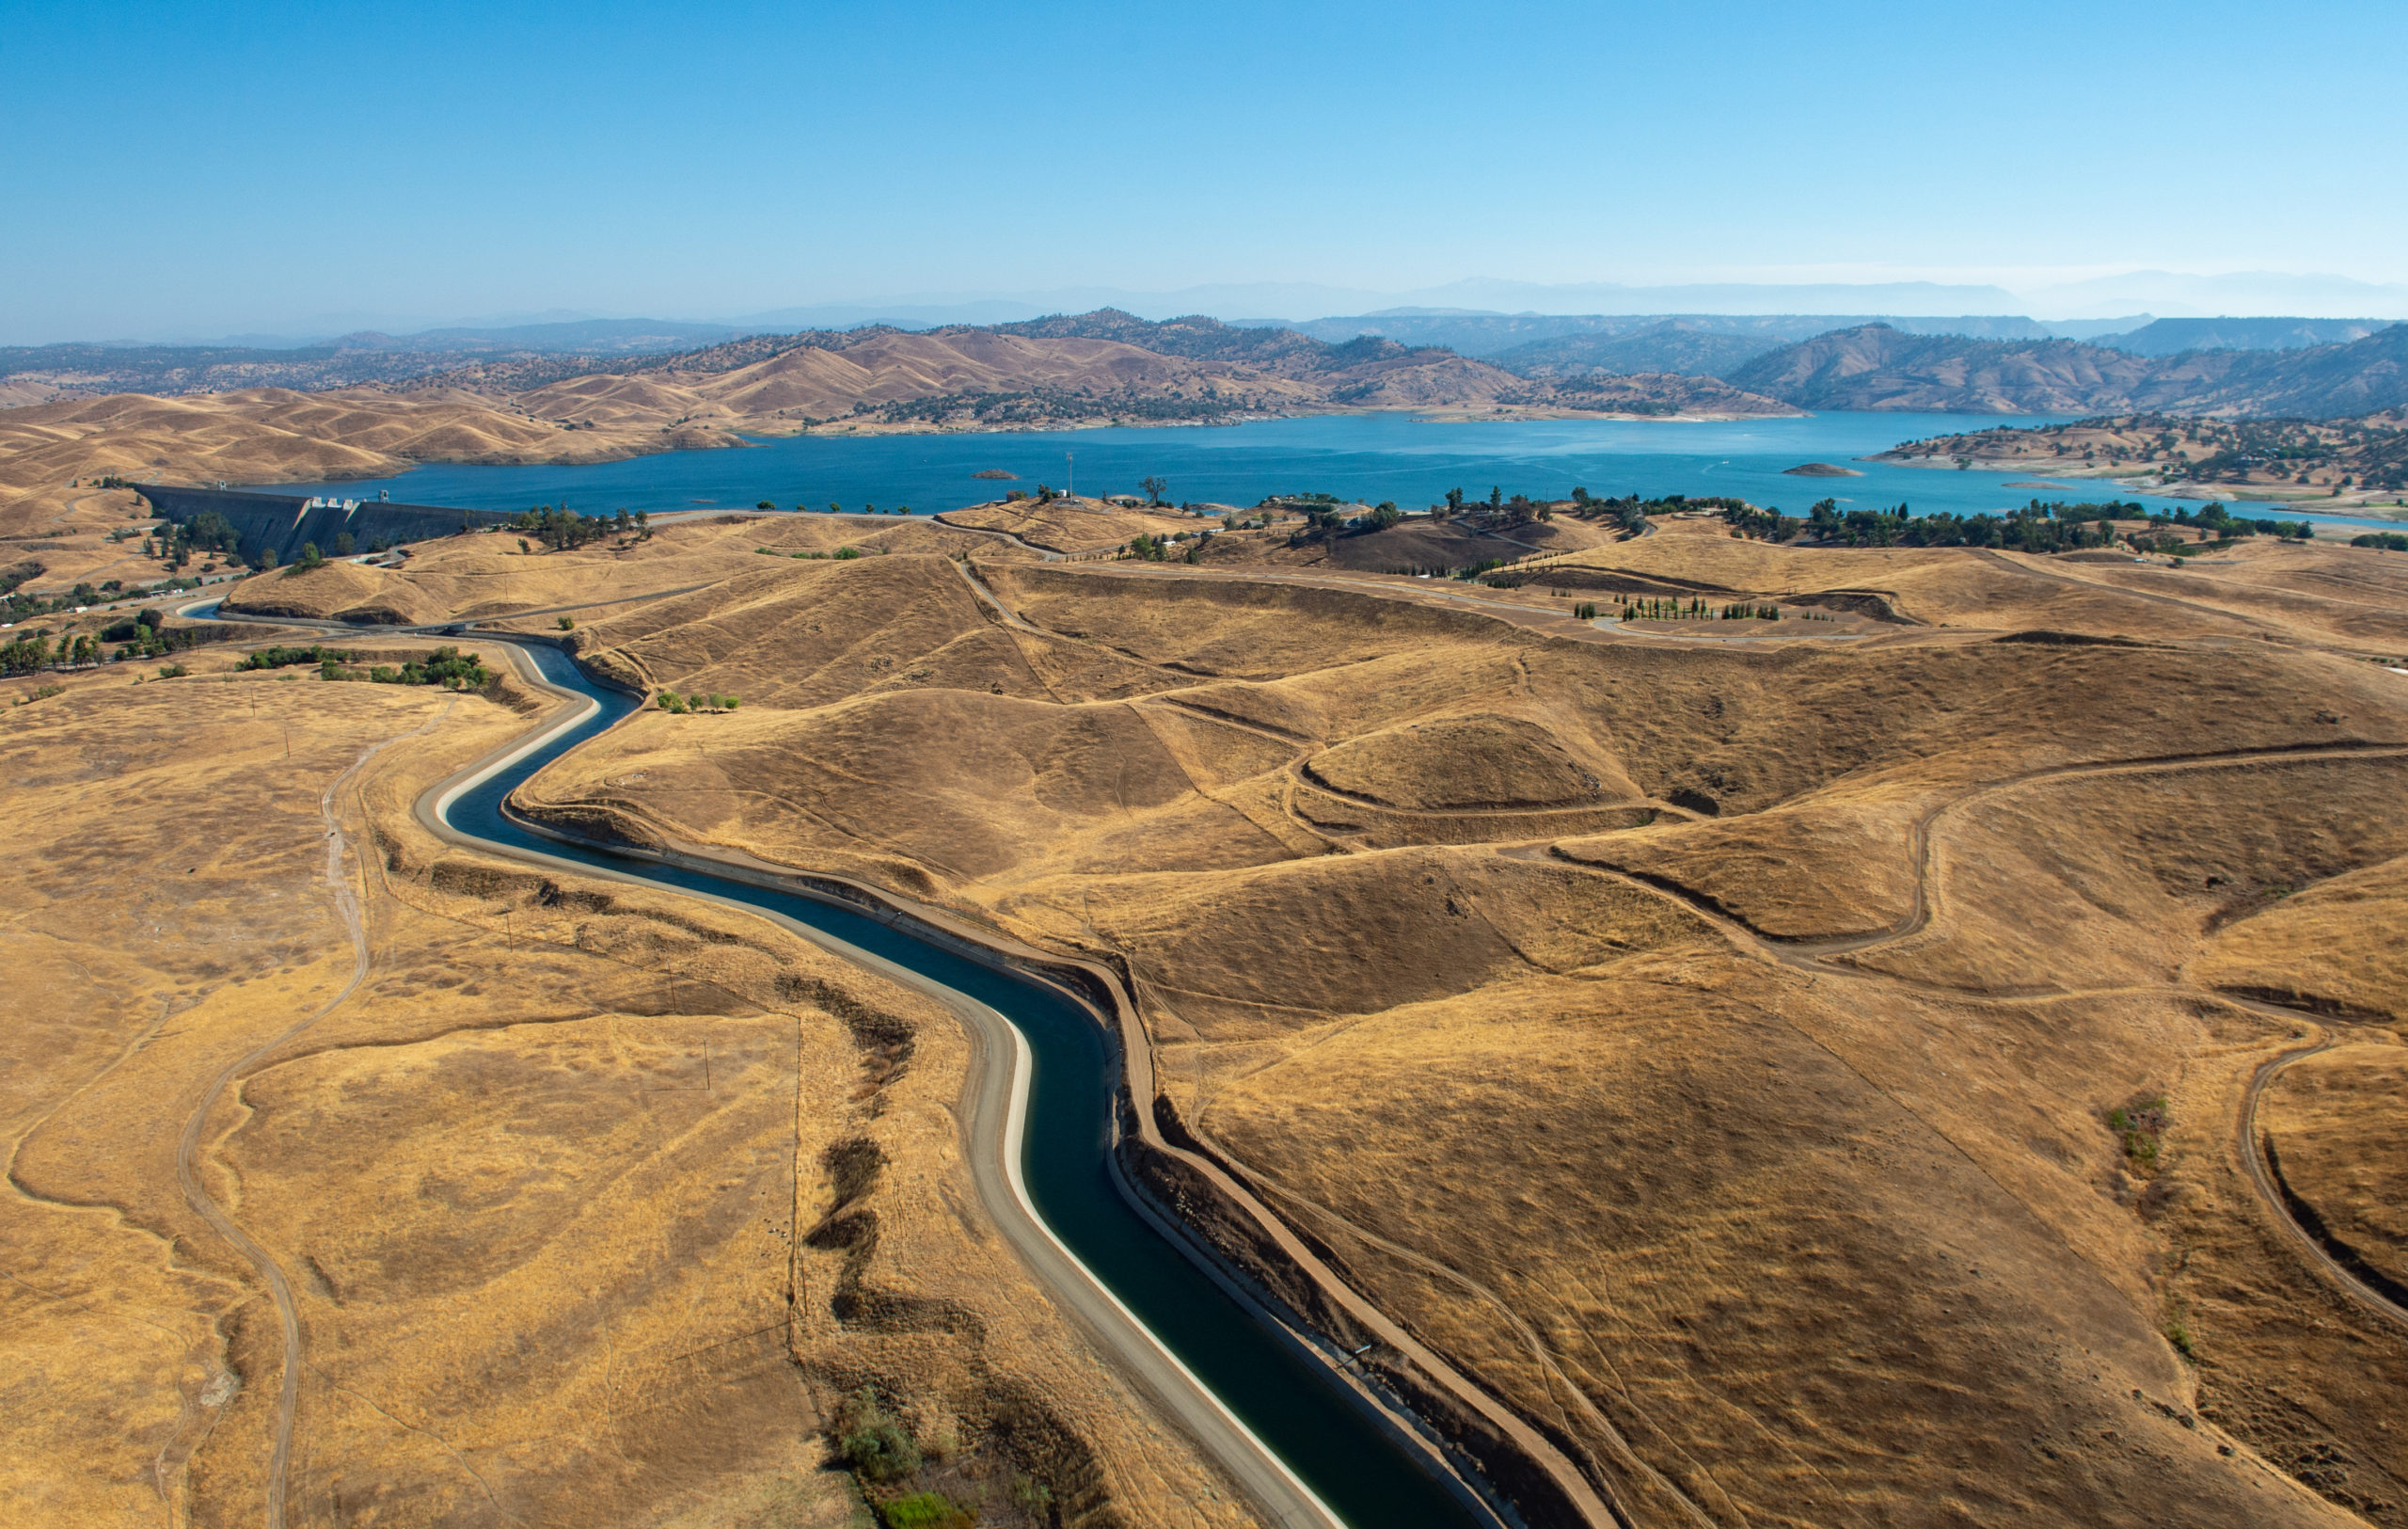 An aerial view of Millerton Lake and Friant Dam, located 16 miles northeast of Fresno, California, which provides flood control, conservation storage, and water releases into the Madera and Friant-Kern canals and delivers water to millions of agricultural lands in Fresno, Kern, Madera and Tulare counties. Photo taken August 8, 2013.